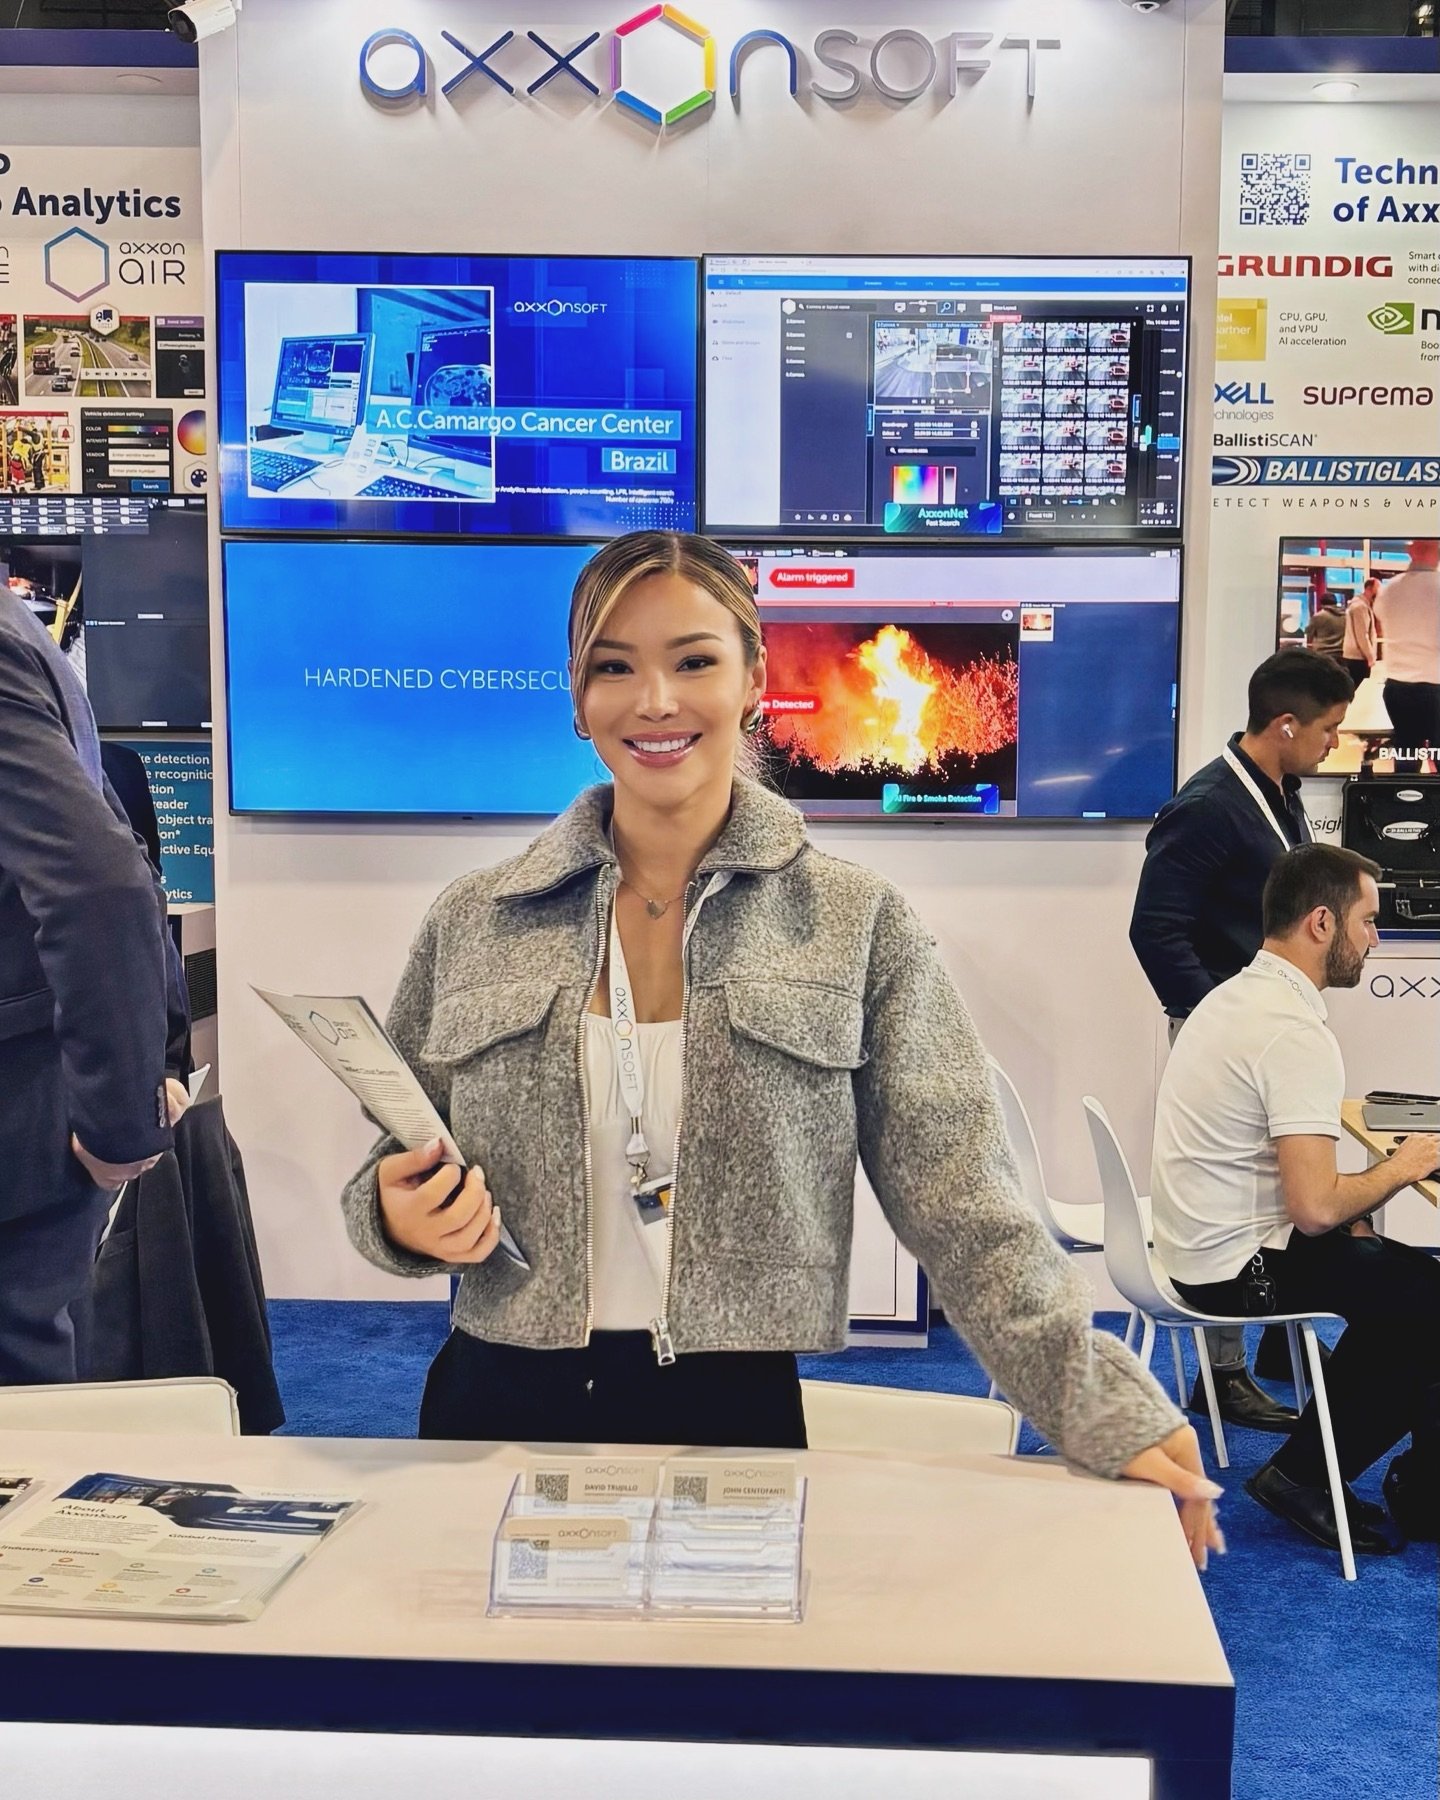 Lighting up ISC West with a smile! 🌟 Honored to represent innovative security solutions and connect with the industry&rsquo;s finest.
📍Las Vegas, NV 
.
.
#iscwest #CyberSecurity #TechTrends #BlossomTalent #BoothHostess #staffingsolutions #TalentAge